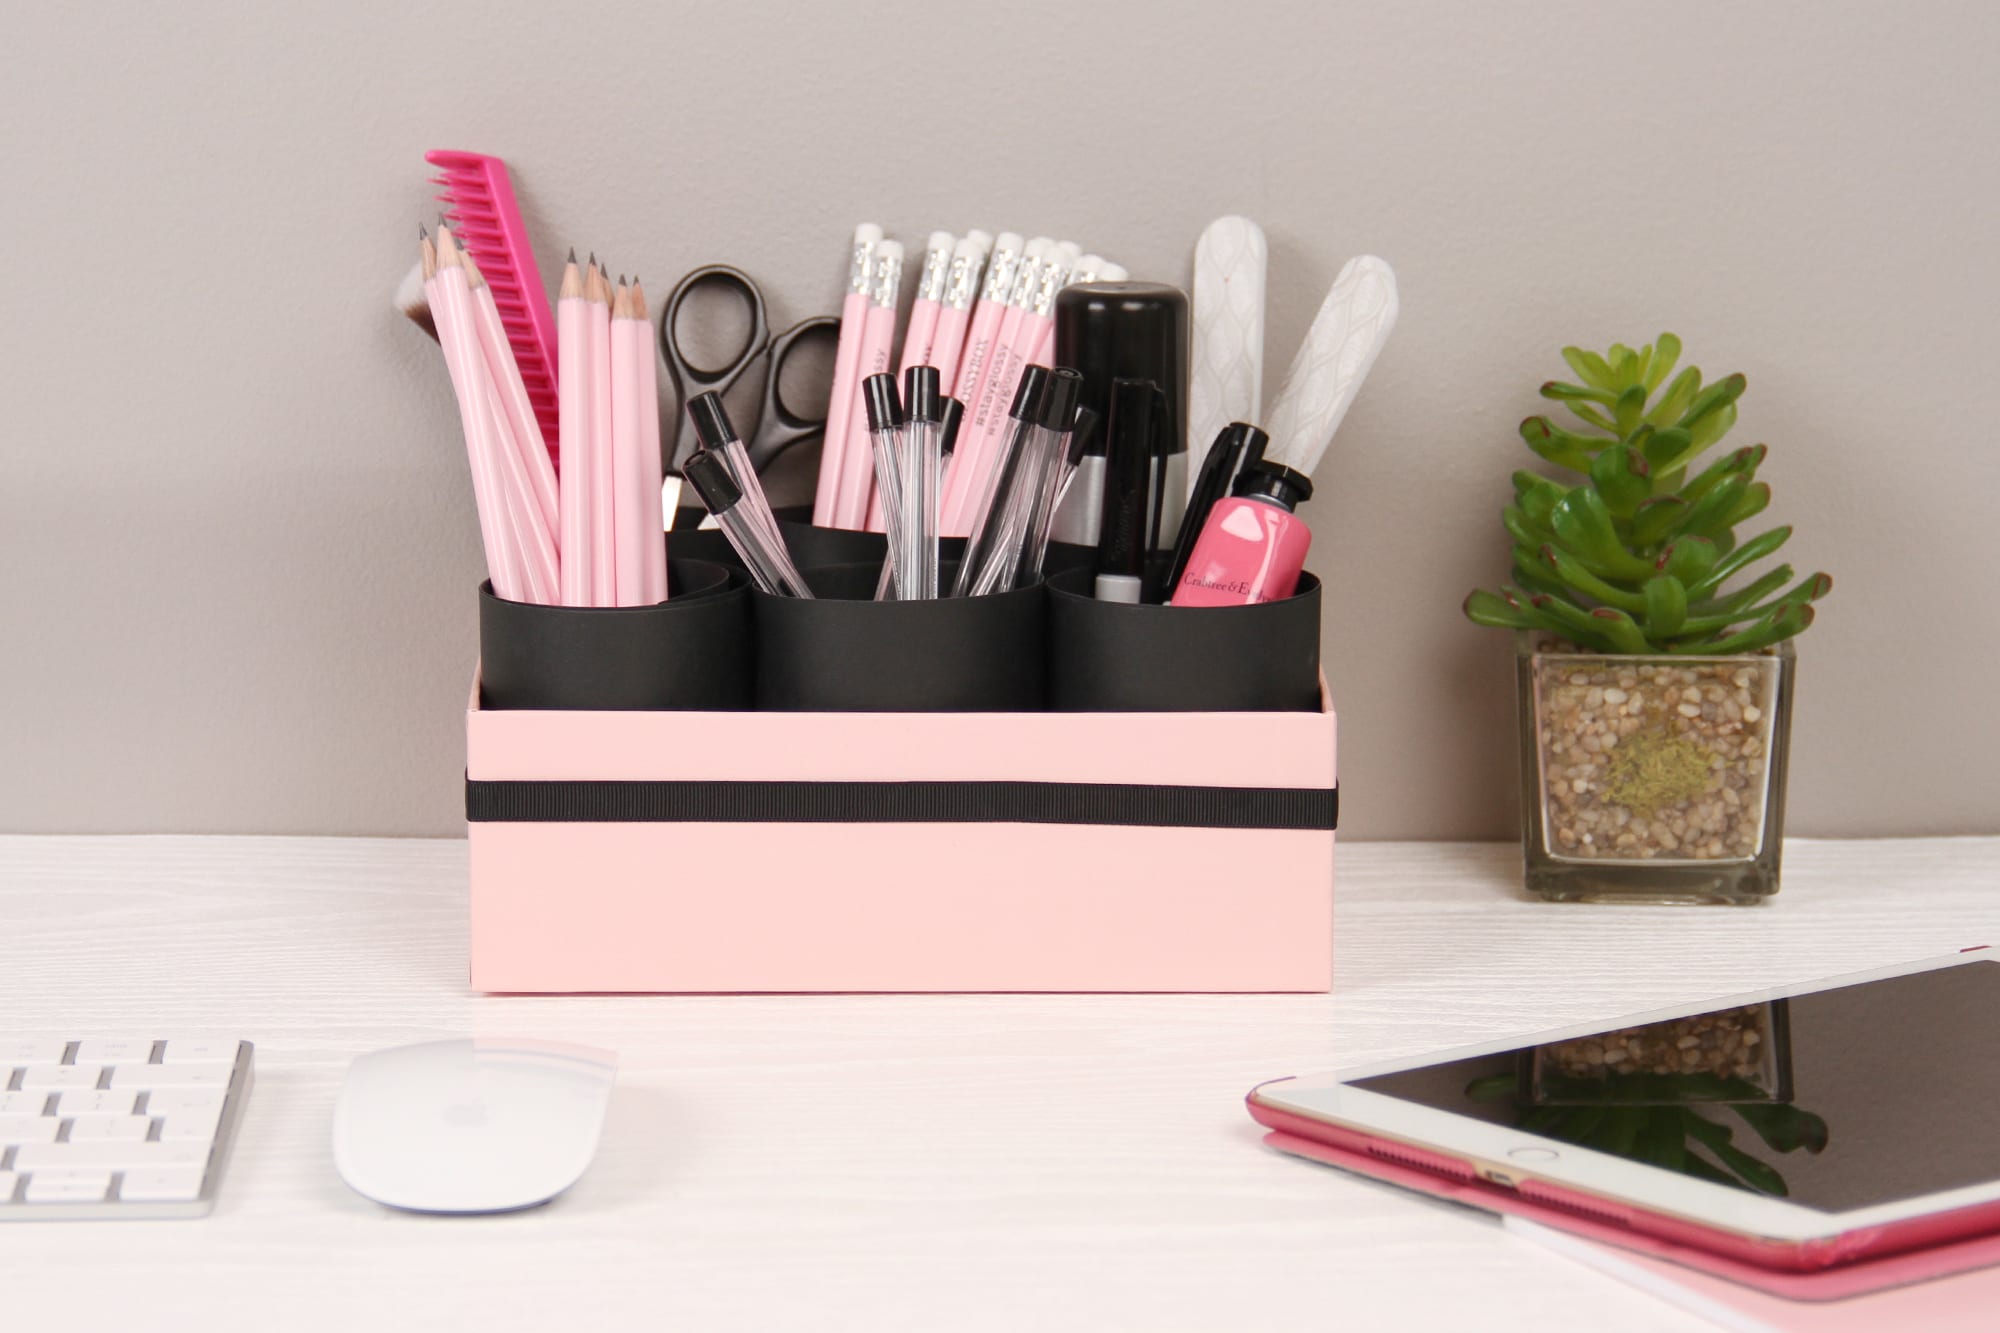 Upscale Your GLOSSYBOX: Three Ways To Get Organised